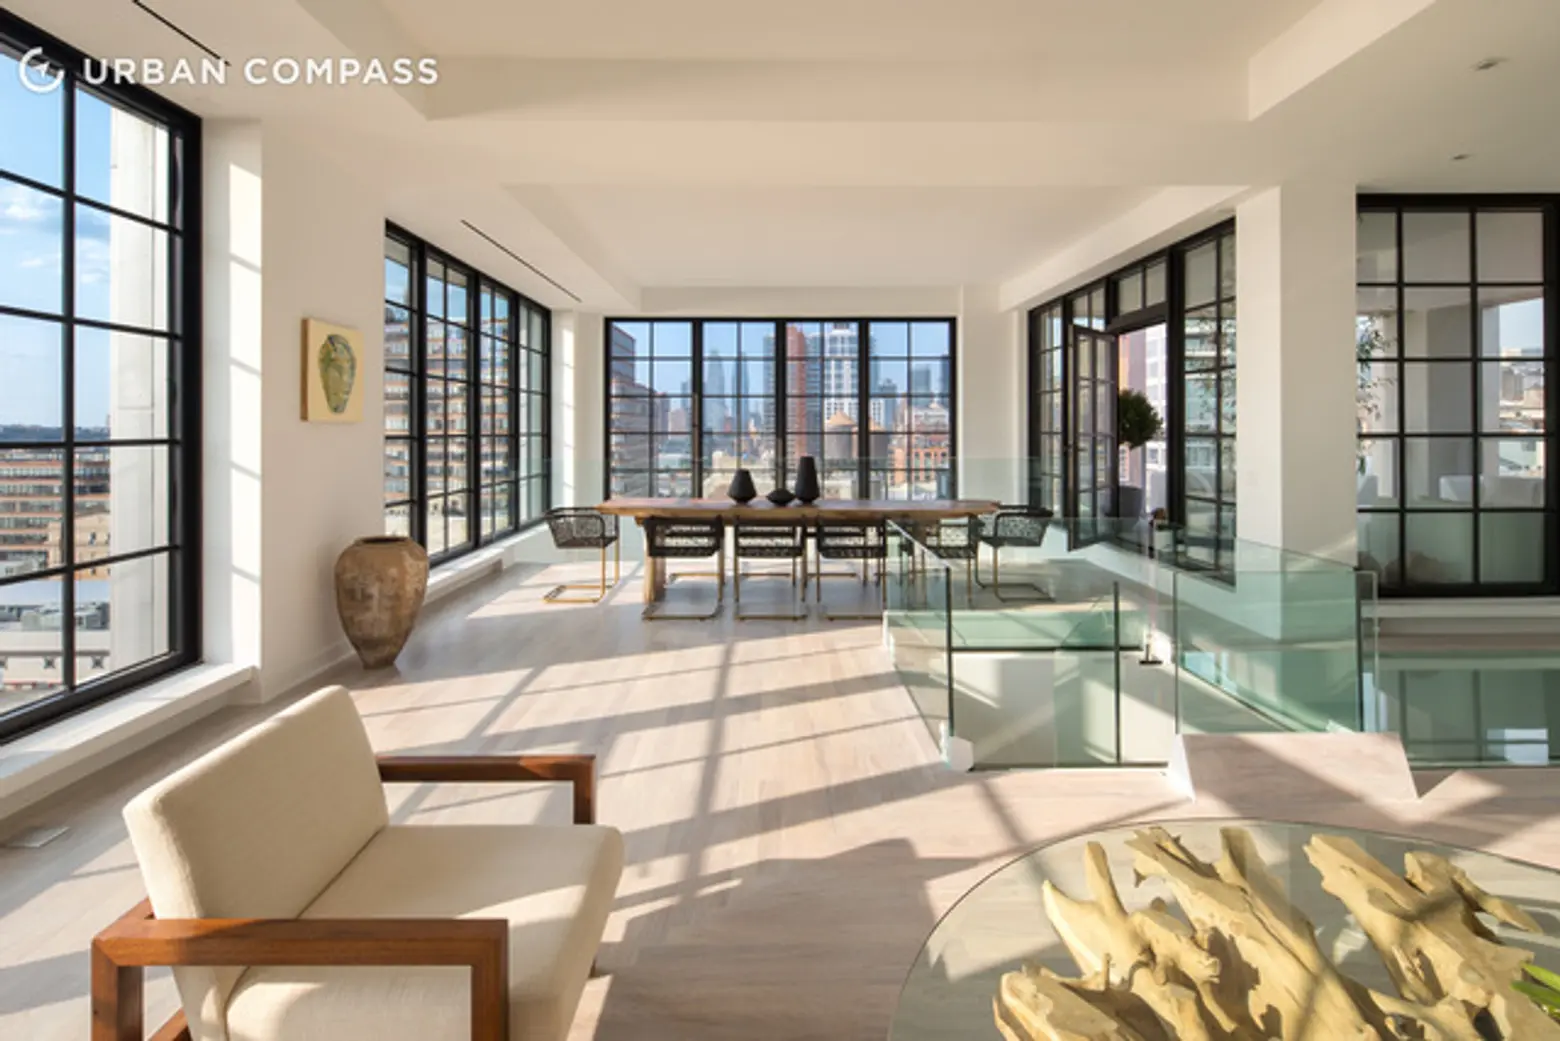 Robert Pattinson Checks Out a $20M Chelsea Penthouse with Drive-In Elevator